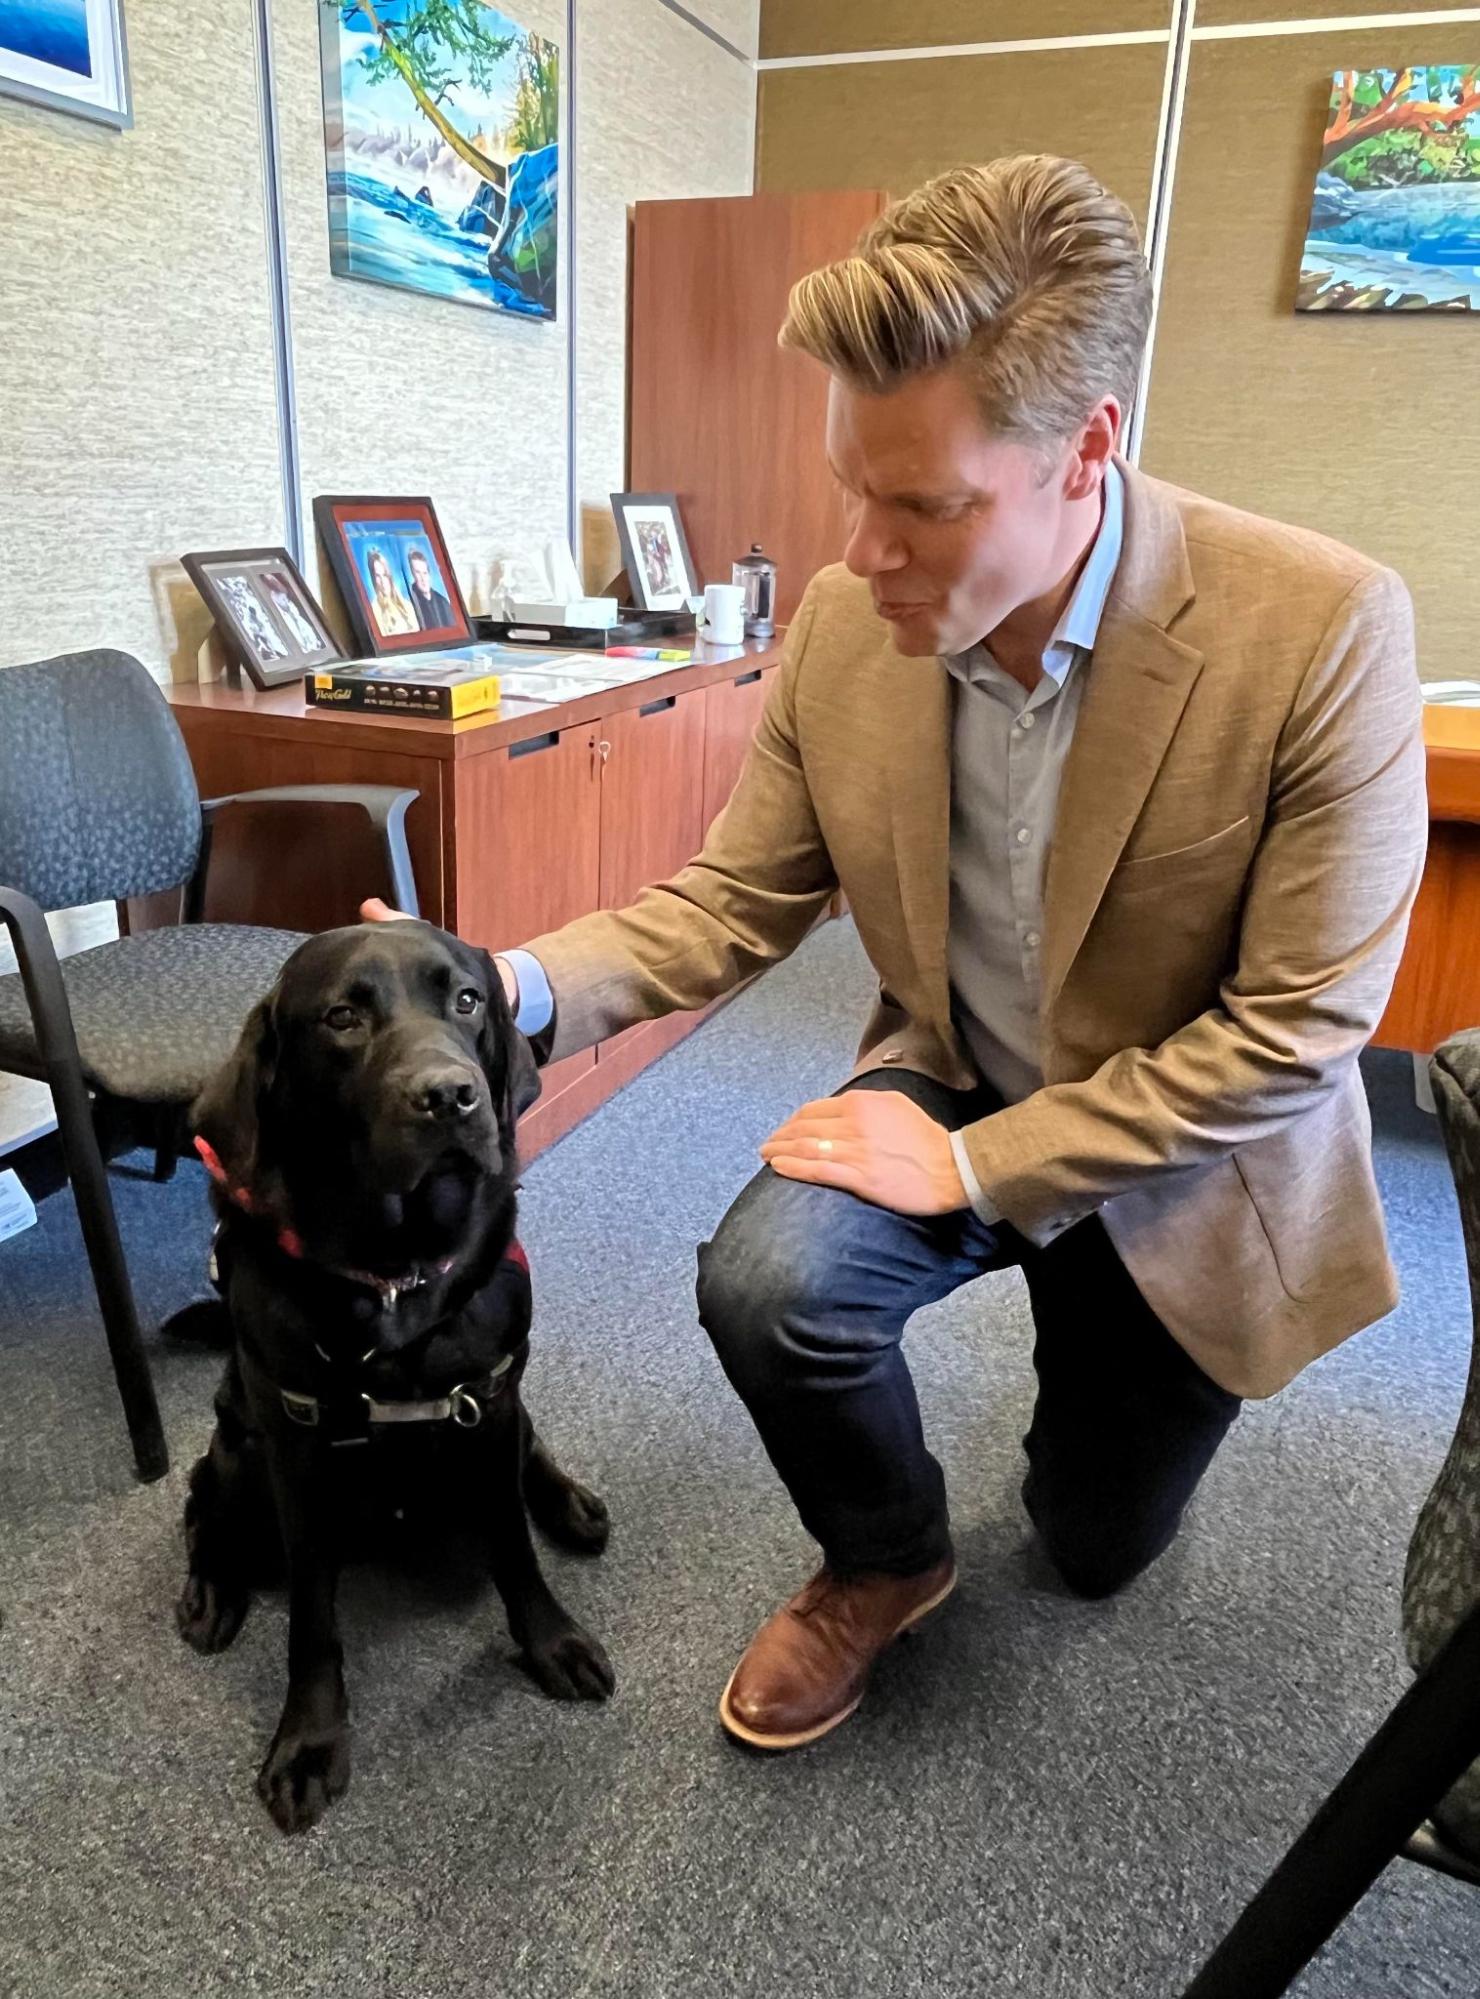 Dean kneels and pets a Black Labrador in an office